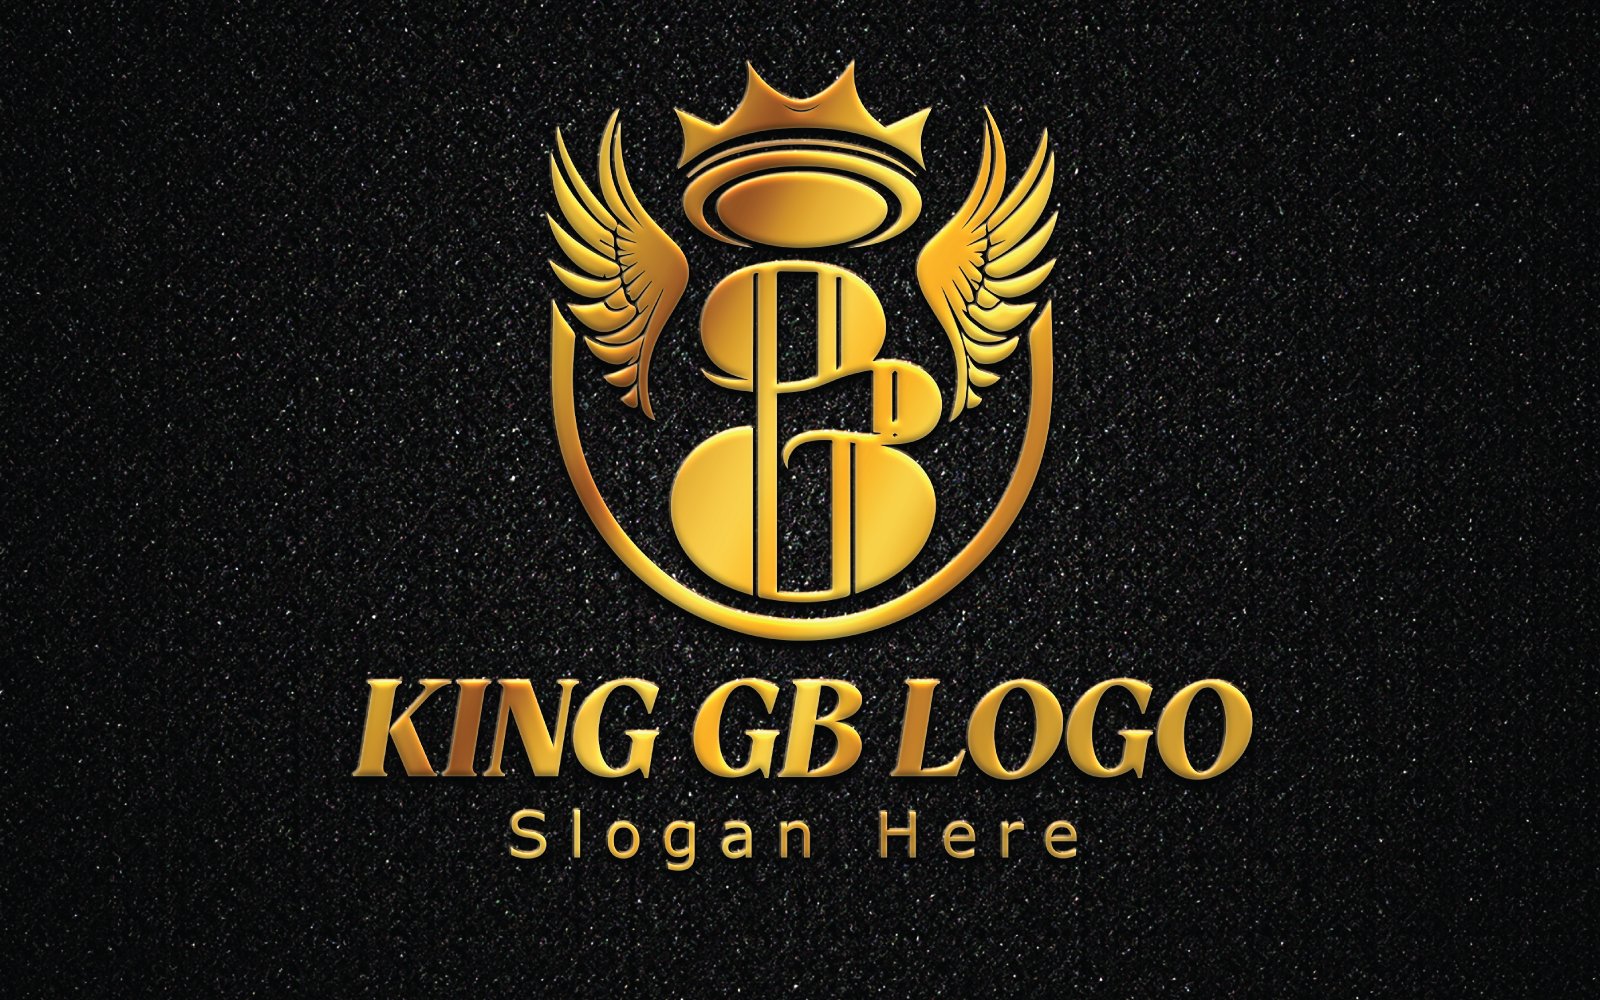 Template #361173 King Gb Webdesign Template - Logo template Preview